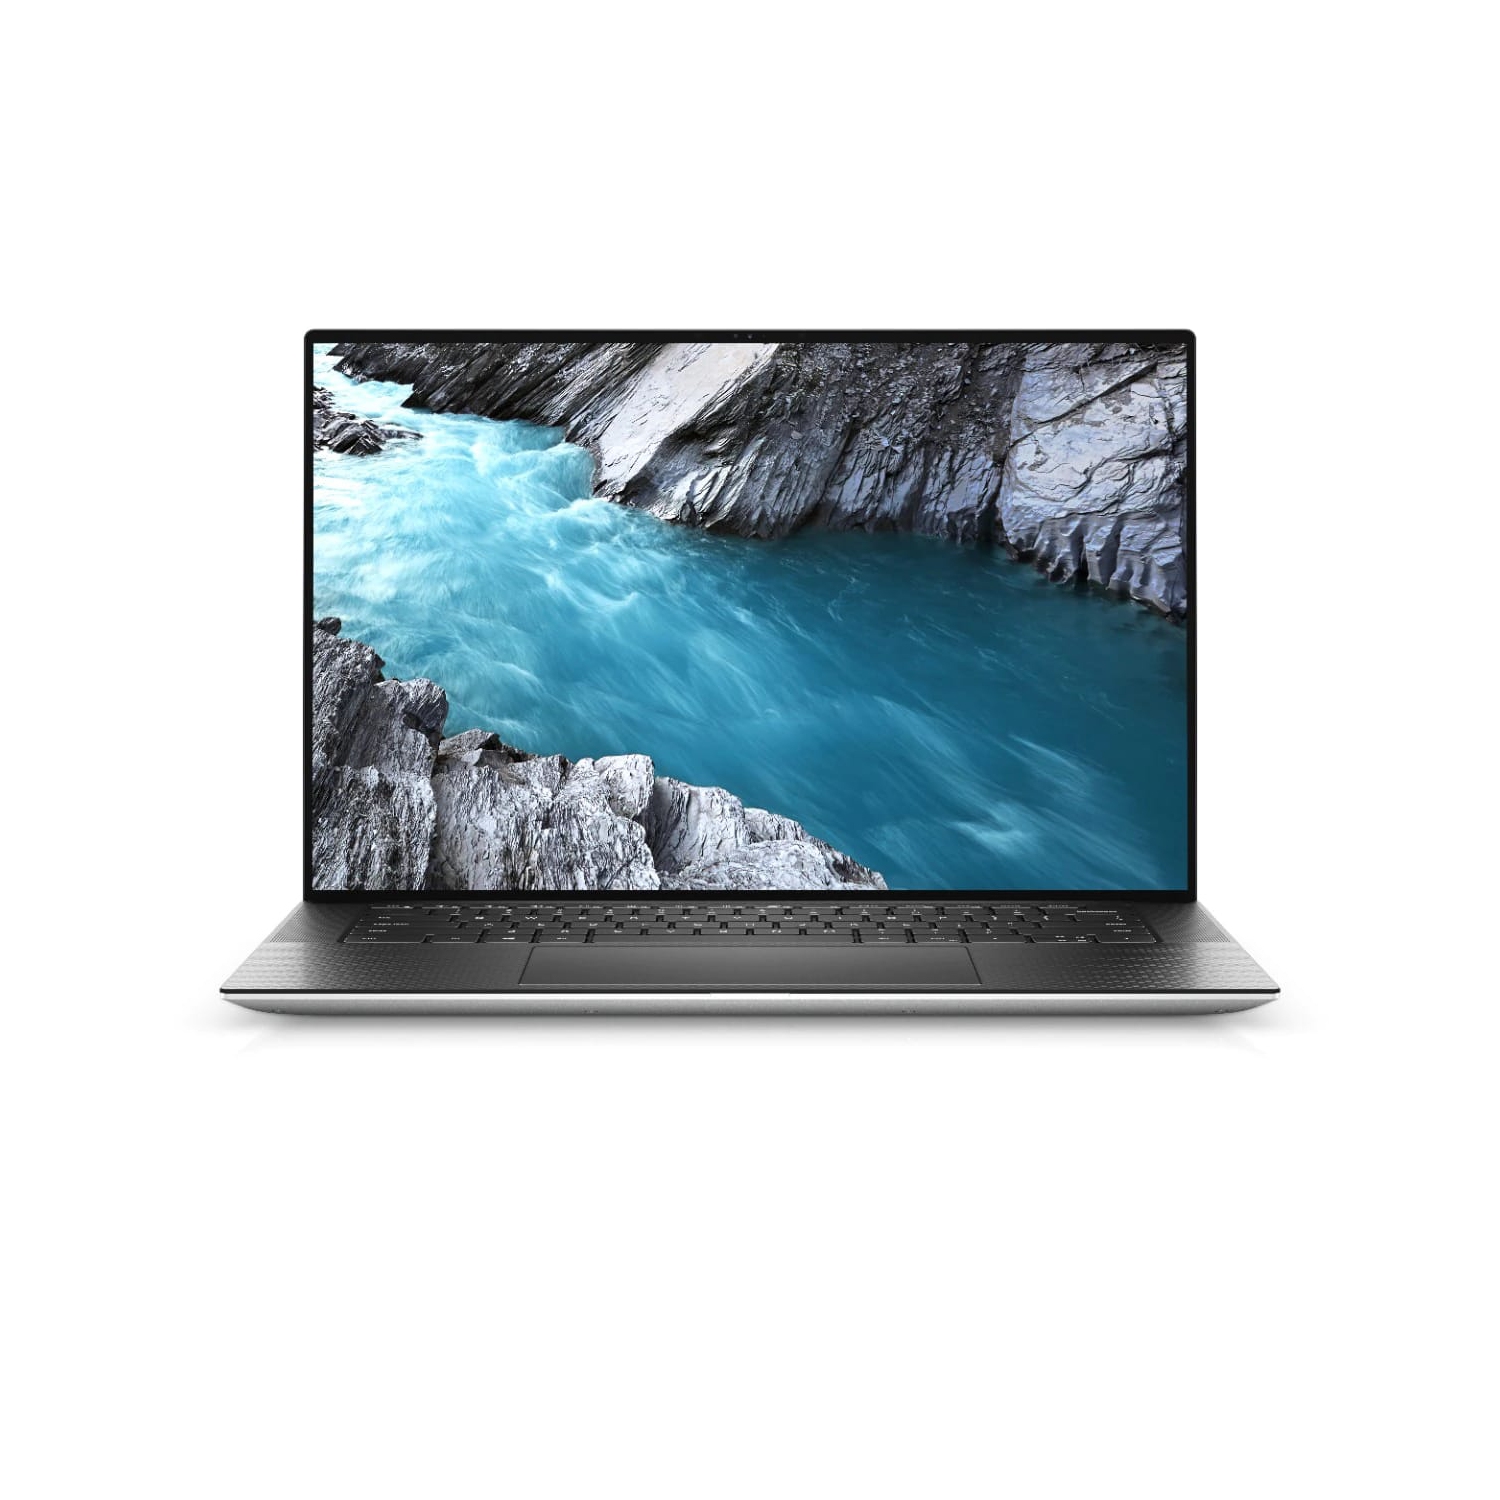 Refurbished (Excellent) - Dell XPS 15 9500 Laptop (2020) | 15" FHD+ | Core i9 - 256GB SSD - 8GB RAM - 1650 Ti | 8 Cores @ 5.3 GHz - 10th Gen CPU Certified Refurbished